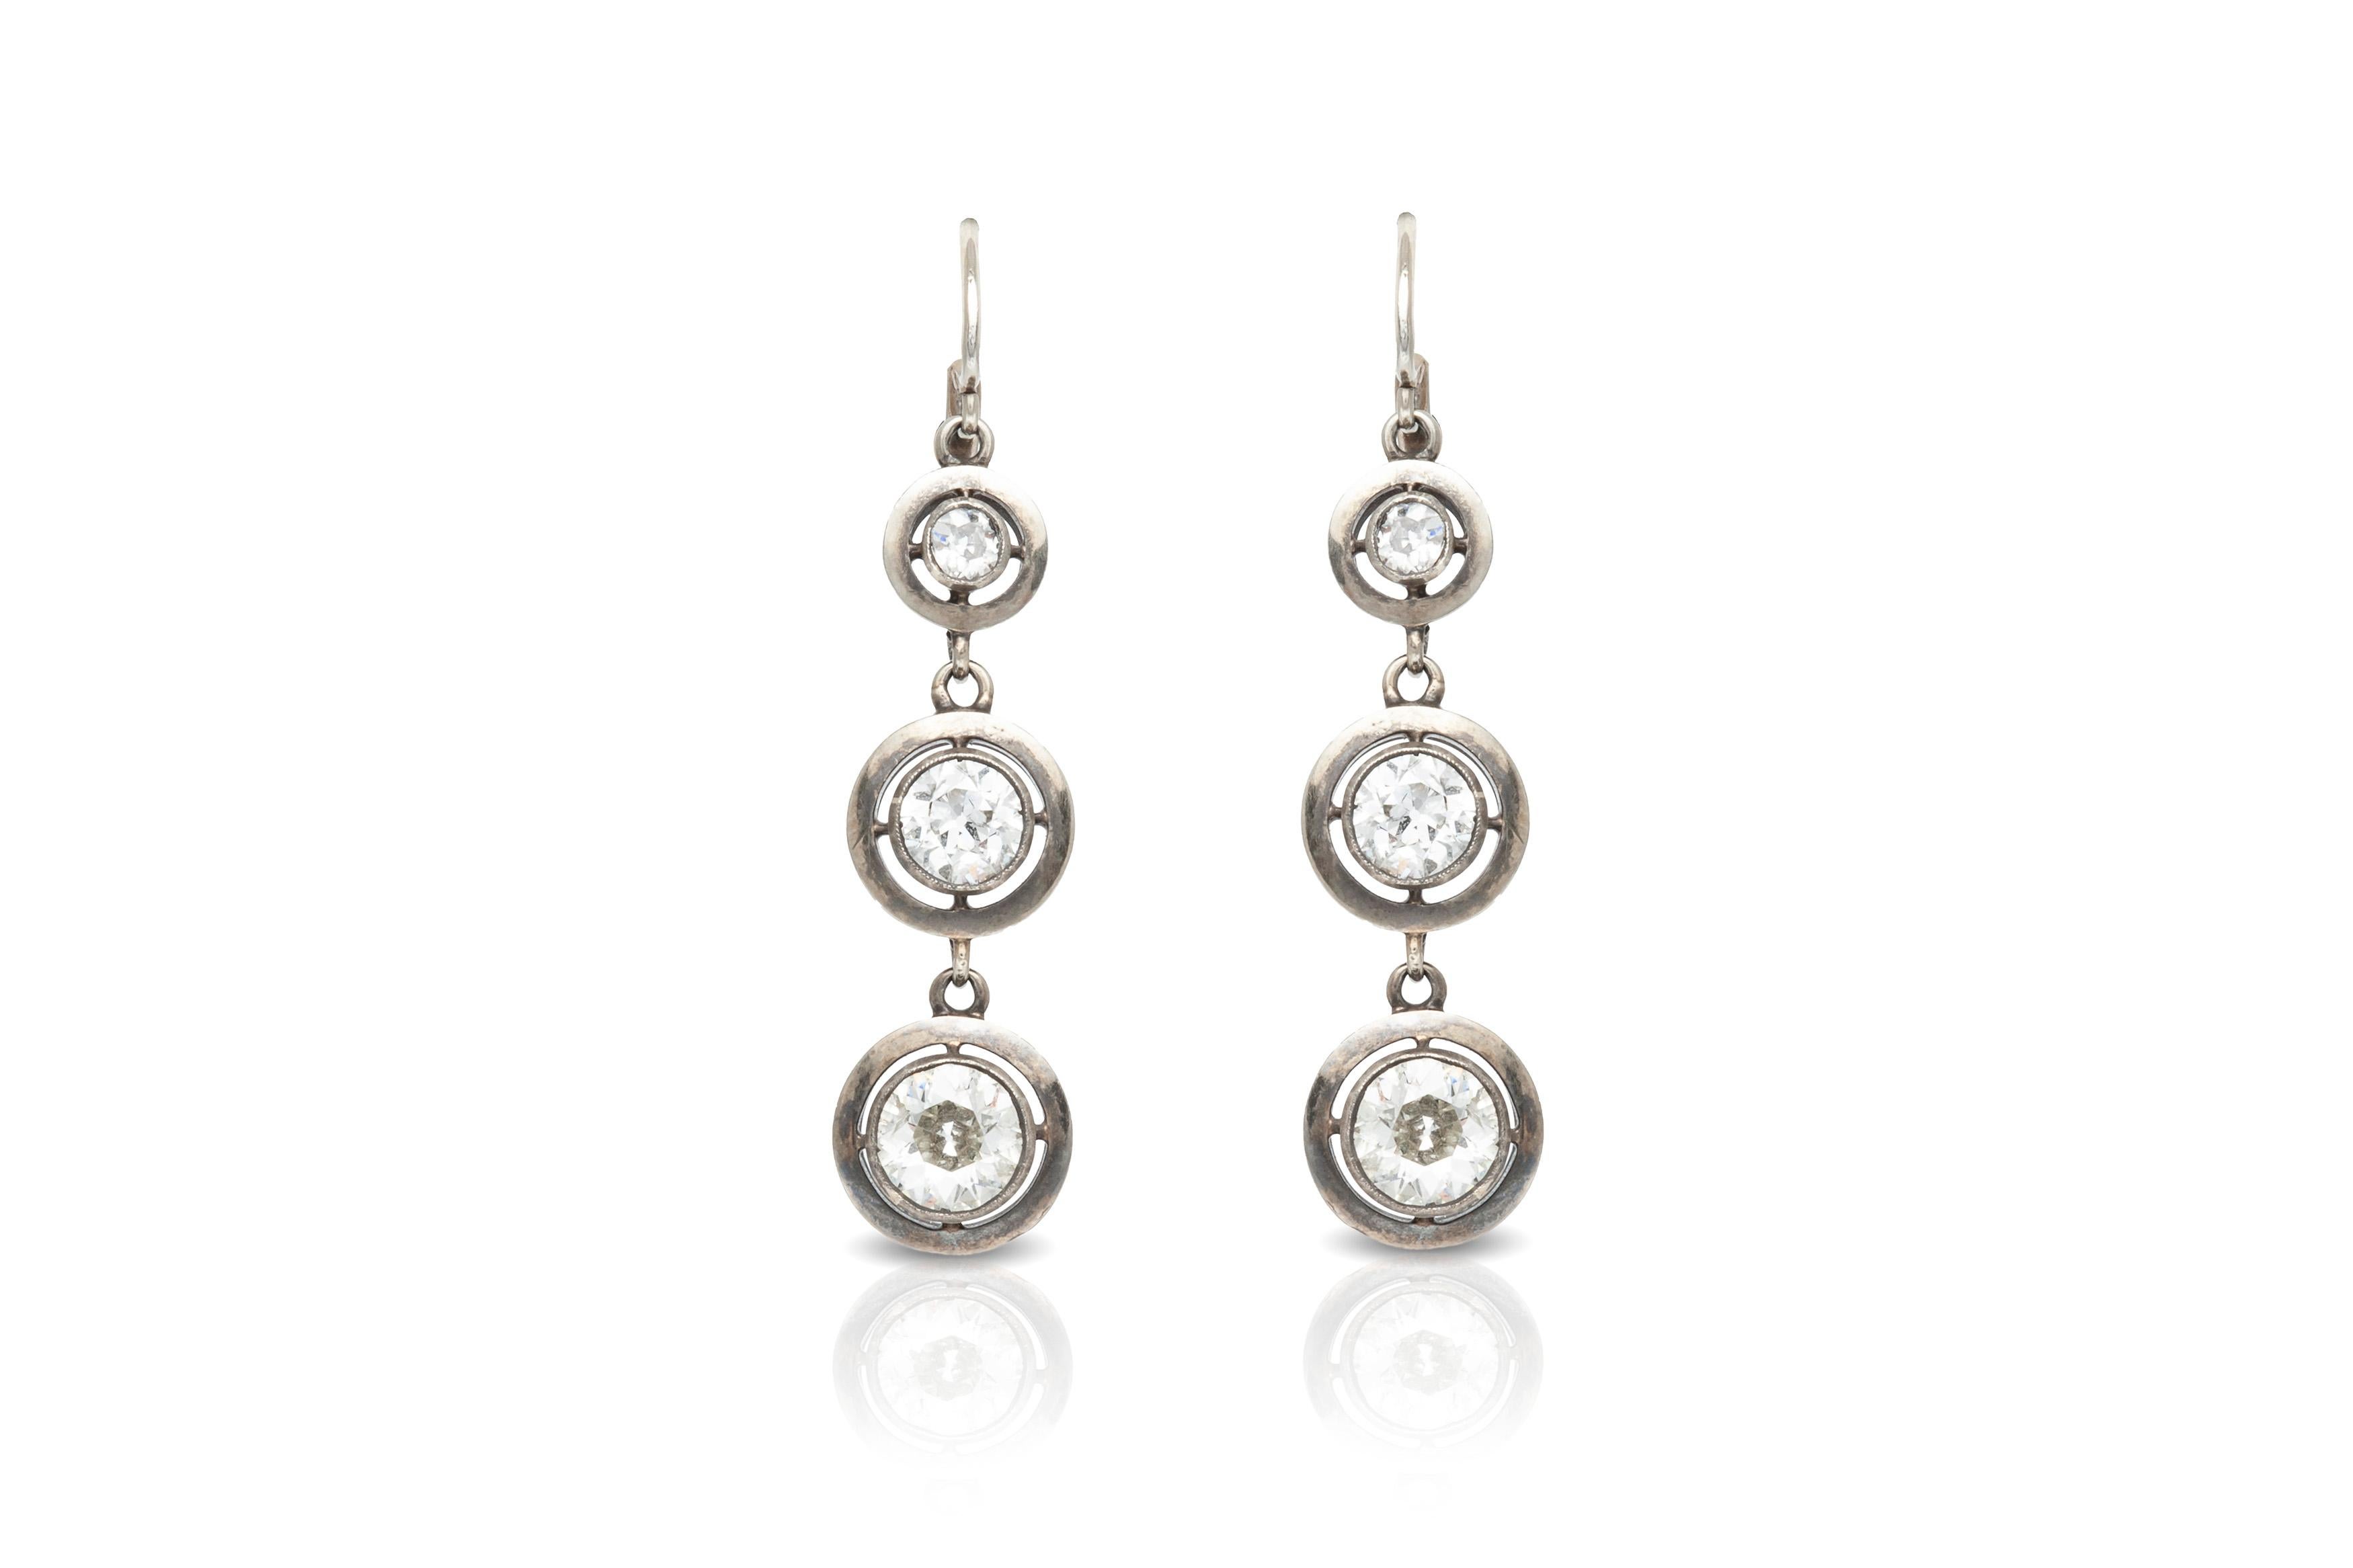 The earrings is finely crafted in 18k with diamonds weighing approximately total of 3.00.